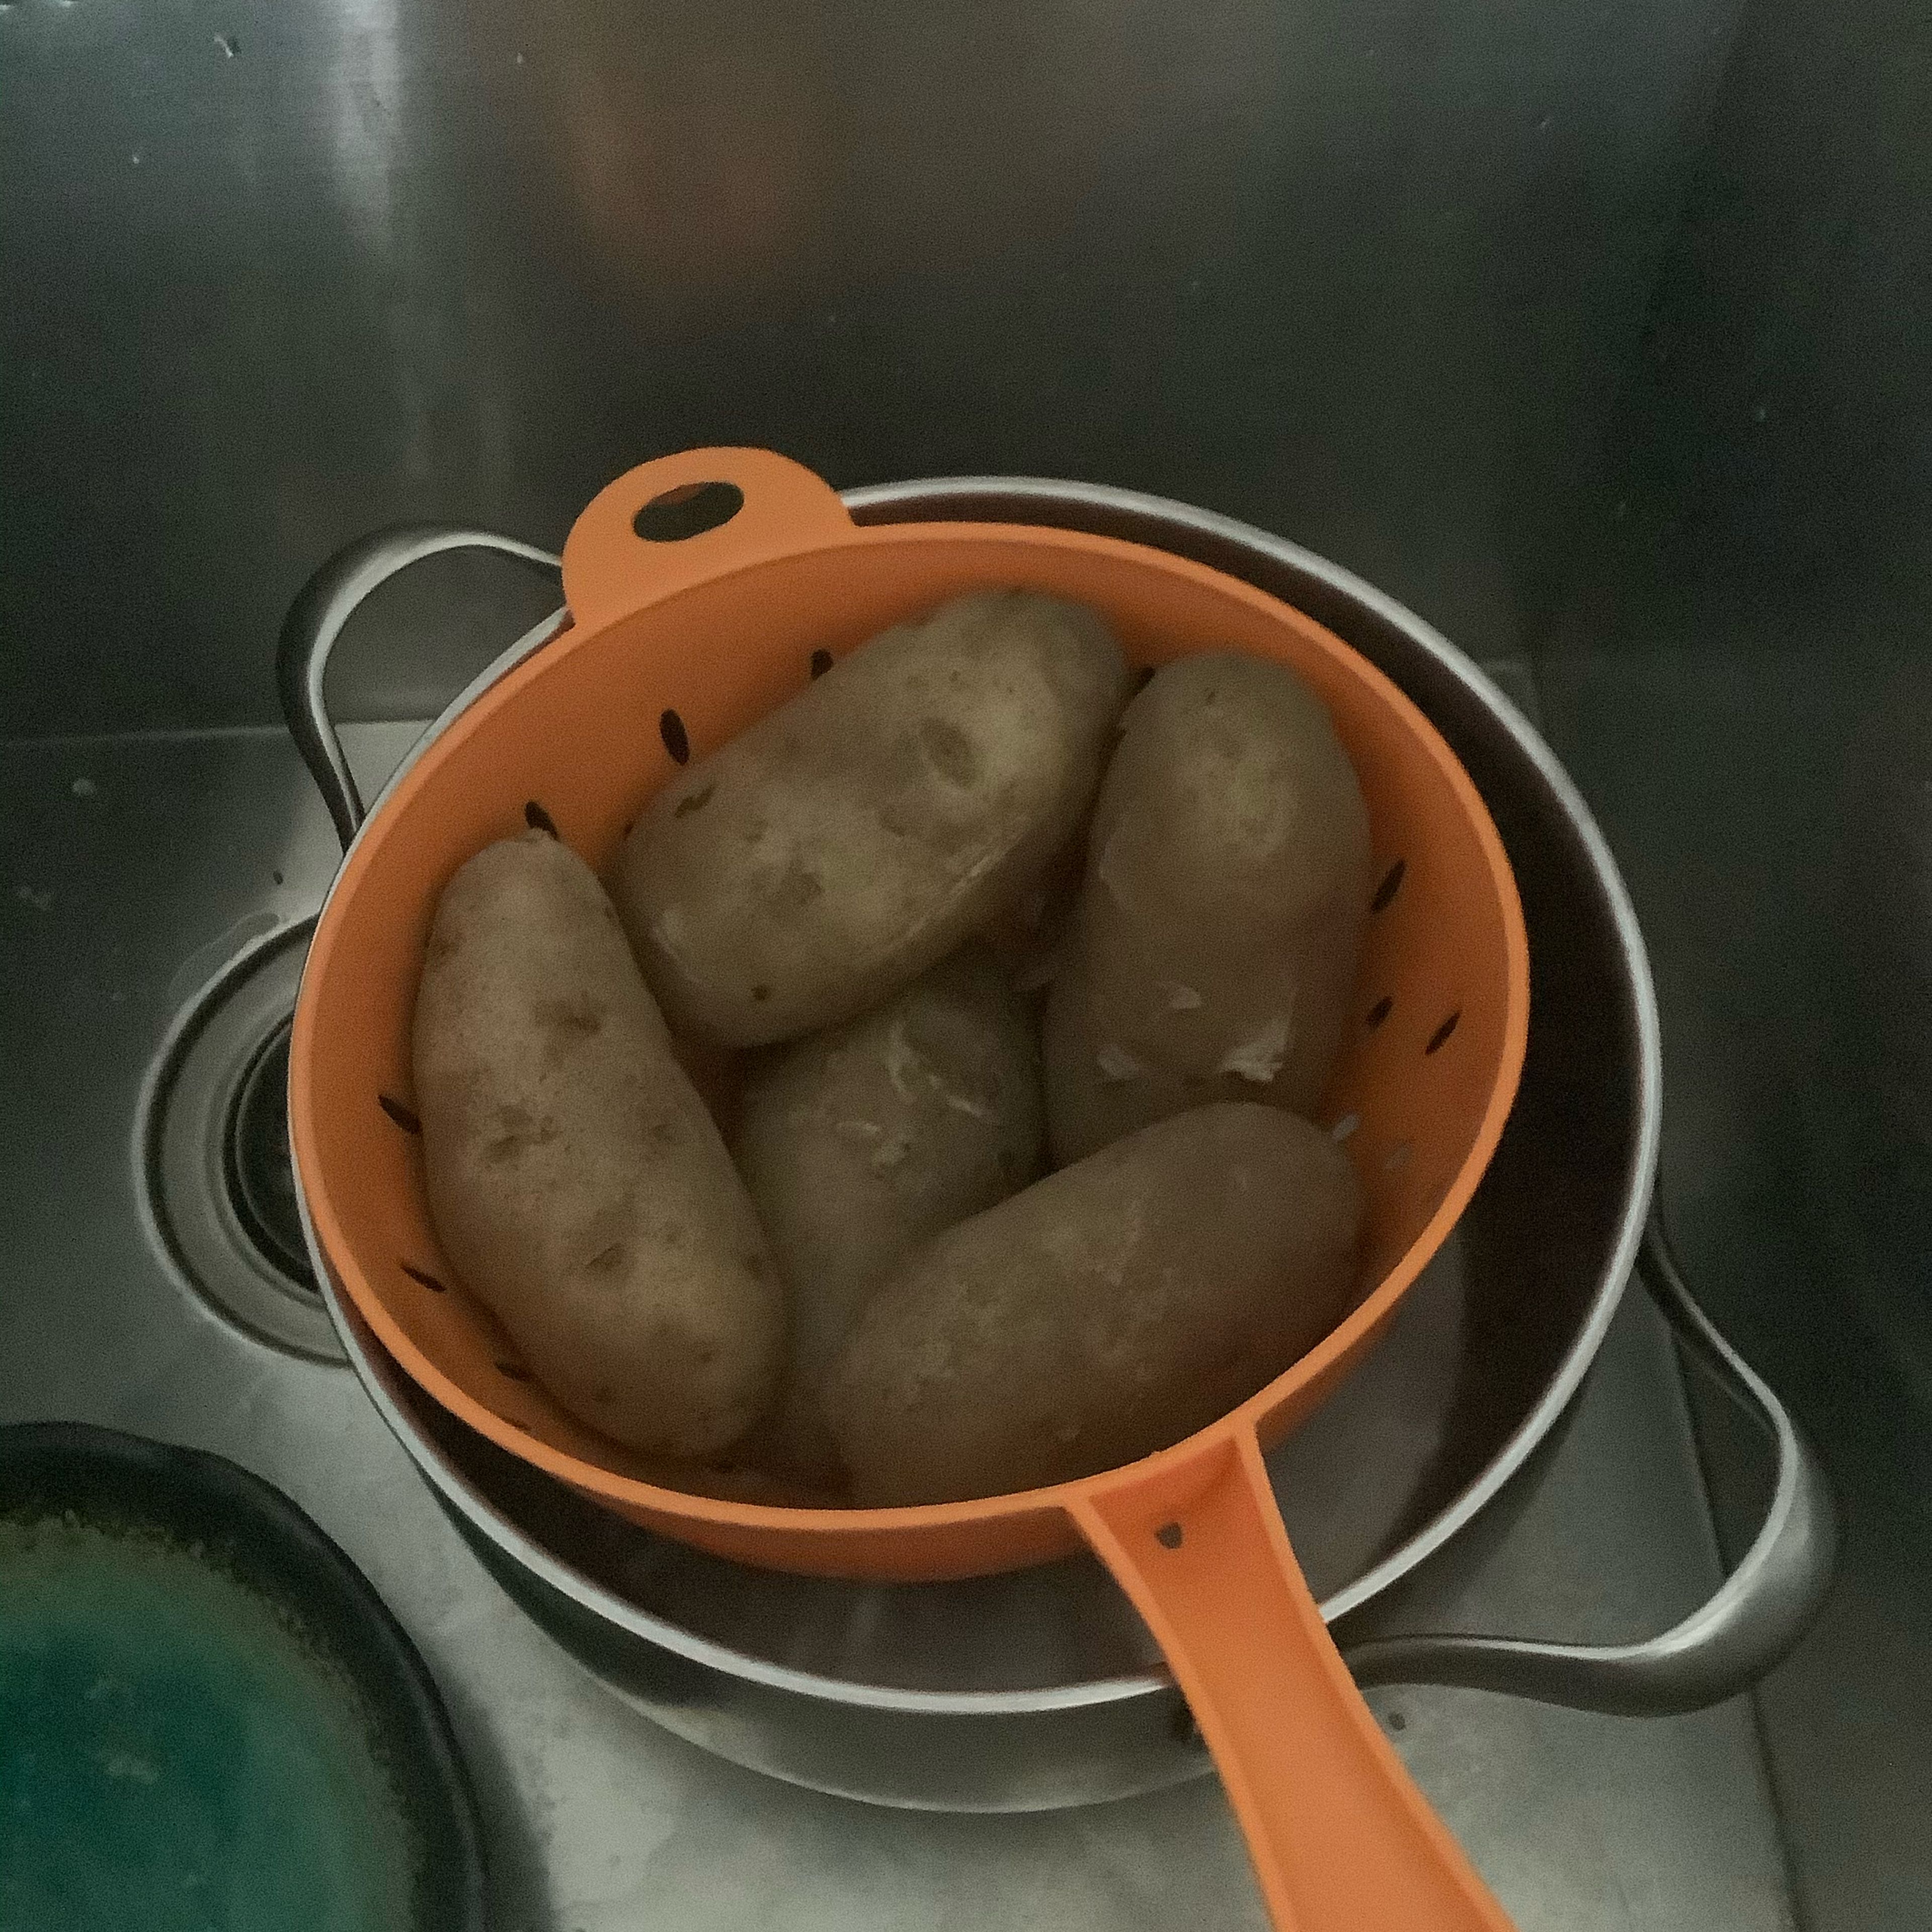 Drain the potatoes from the water and let them rest in the sink for a couple of minutes